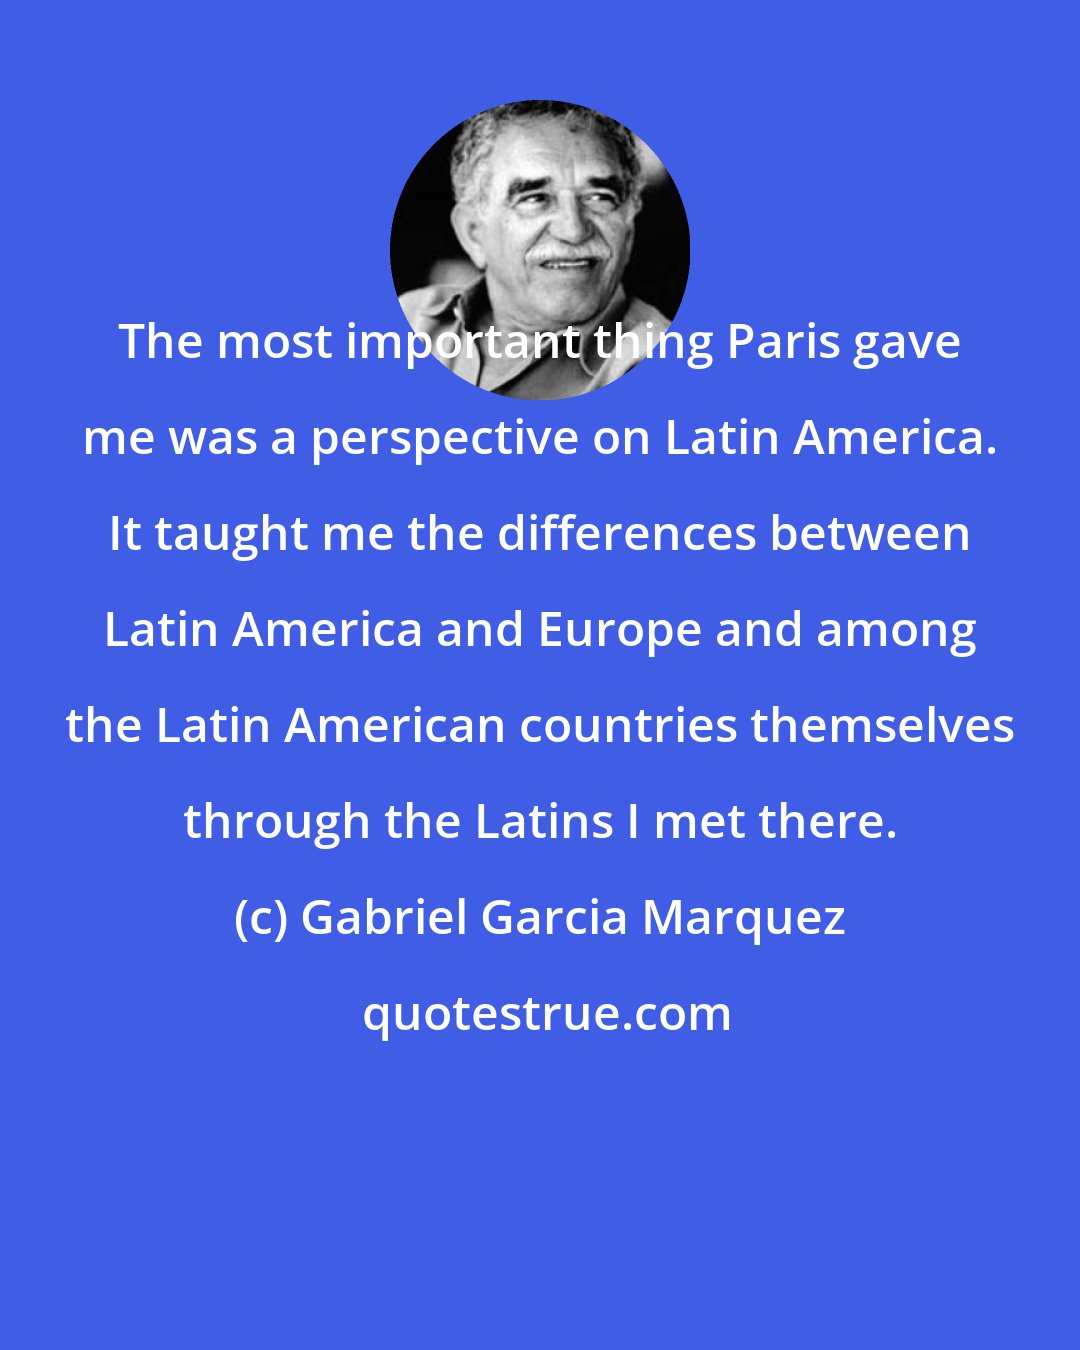 Gabriel Garcia Marquez: The most important thing Paris gave me was a perspective on Latin America. It taught me the differences between Latin America and Europe and among the Latin American countries themselves through the Latins I met there.